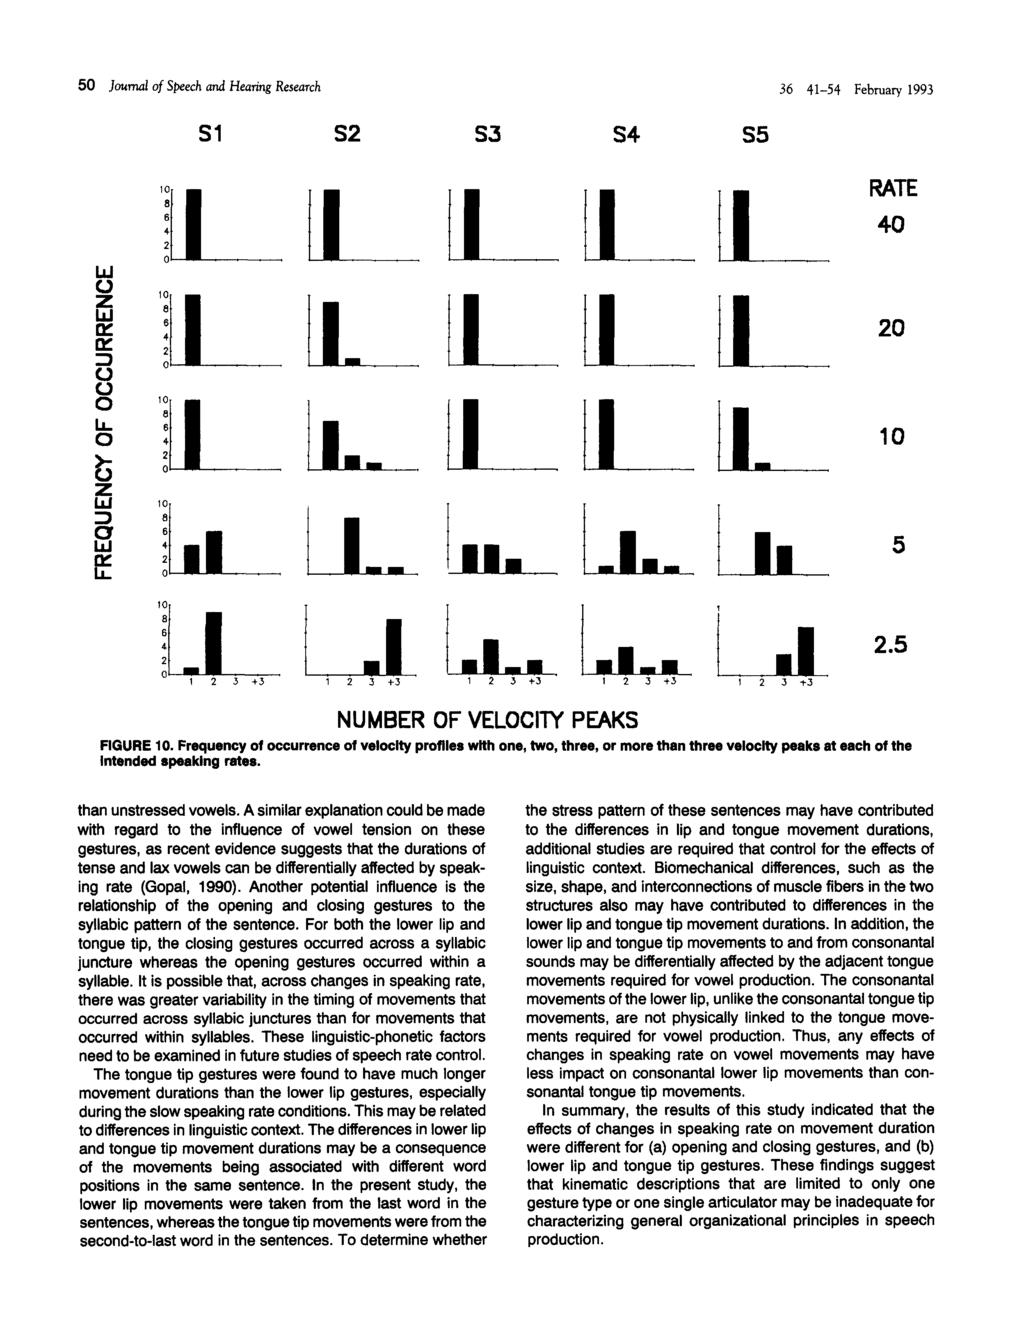 5 Journal of Speech and Hearing Research 36 41-54 February 993 S1 S2 S3 S4 S5 w C., zo 1 6W1 LL l L I RATE 4 2 o7o O C.) oill a, ;- L I L 1 z 5 2 L 1 L 1 2 3 +3 1 2 3 +3 1 2 3 +3 1 2 3 +3 1 2 3 +3 2.